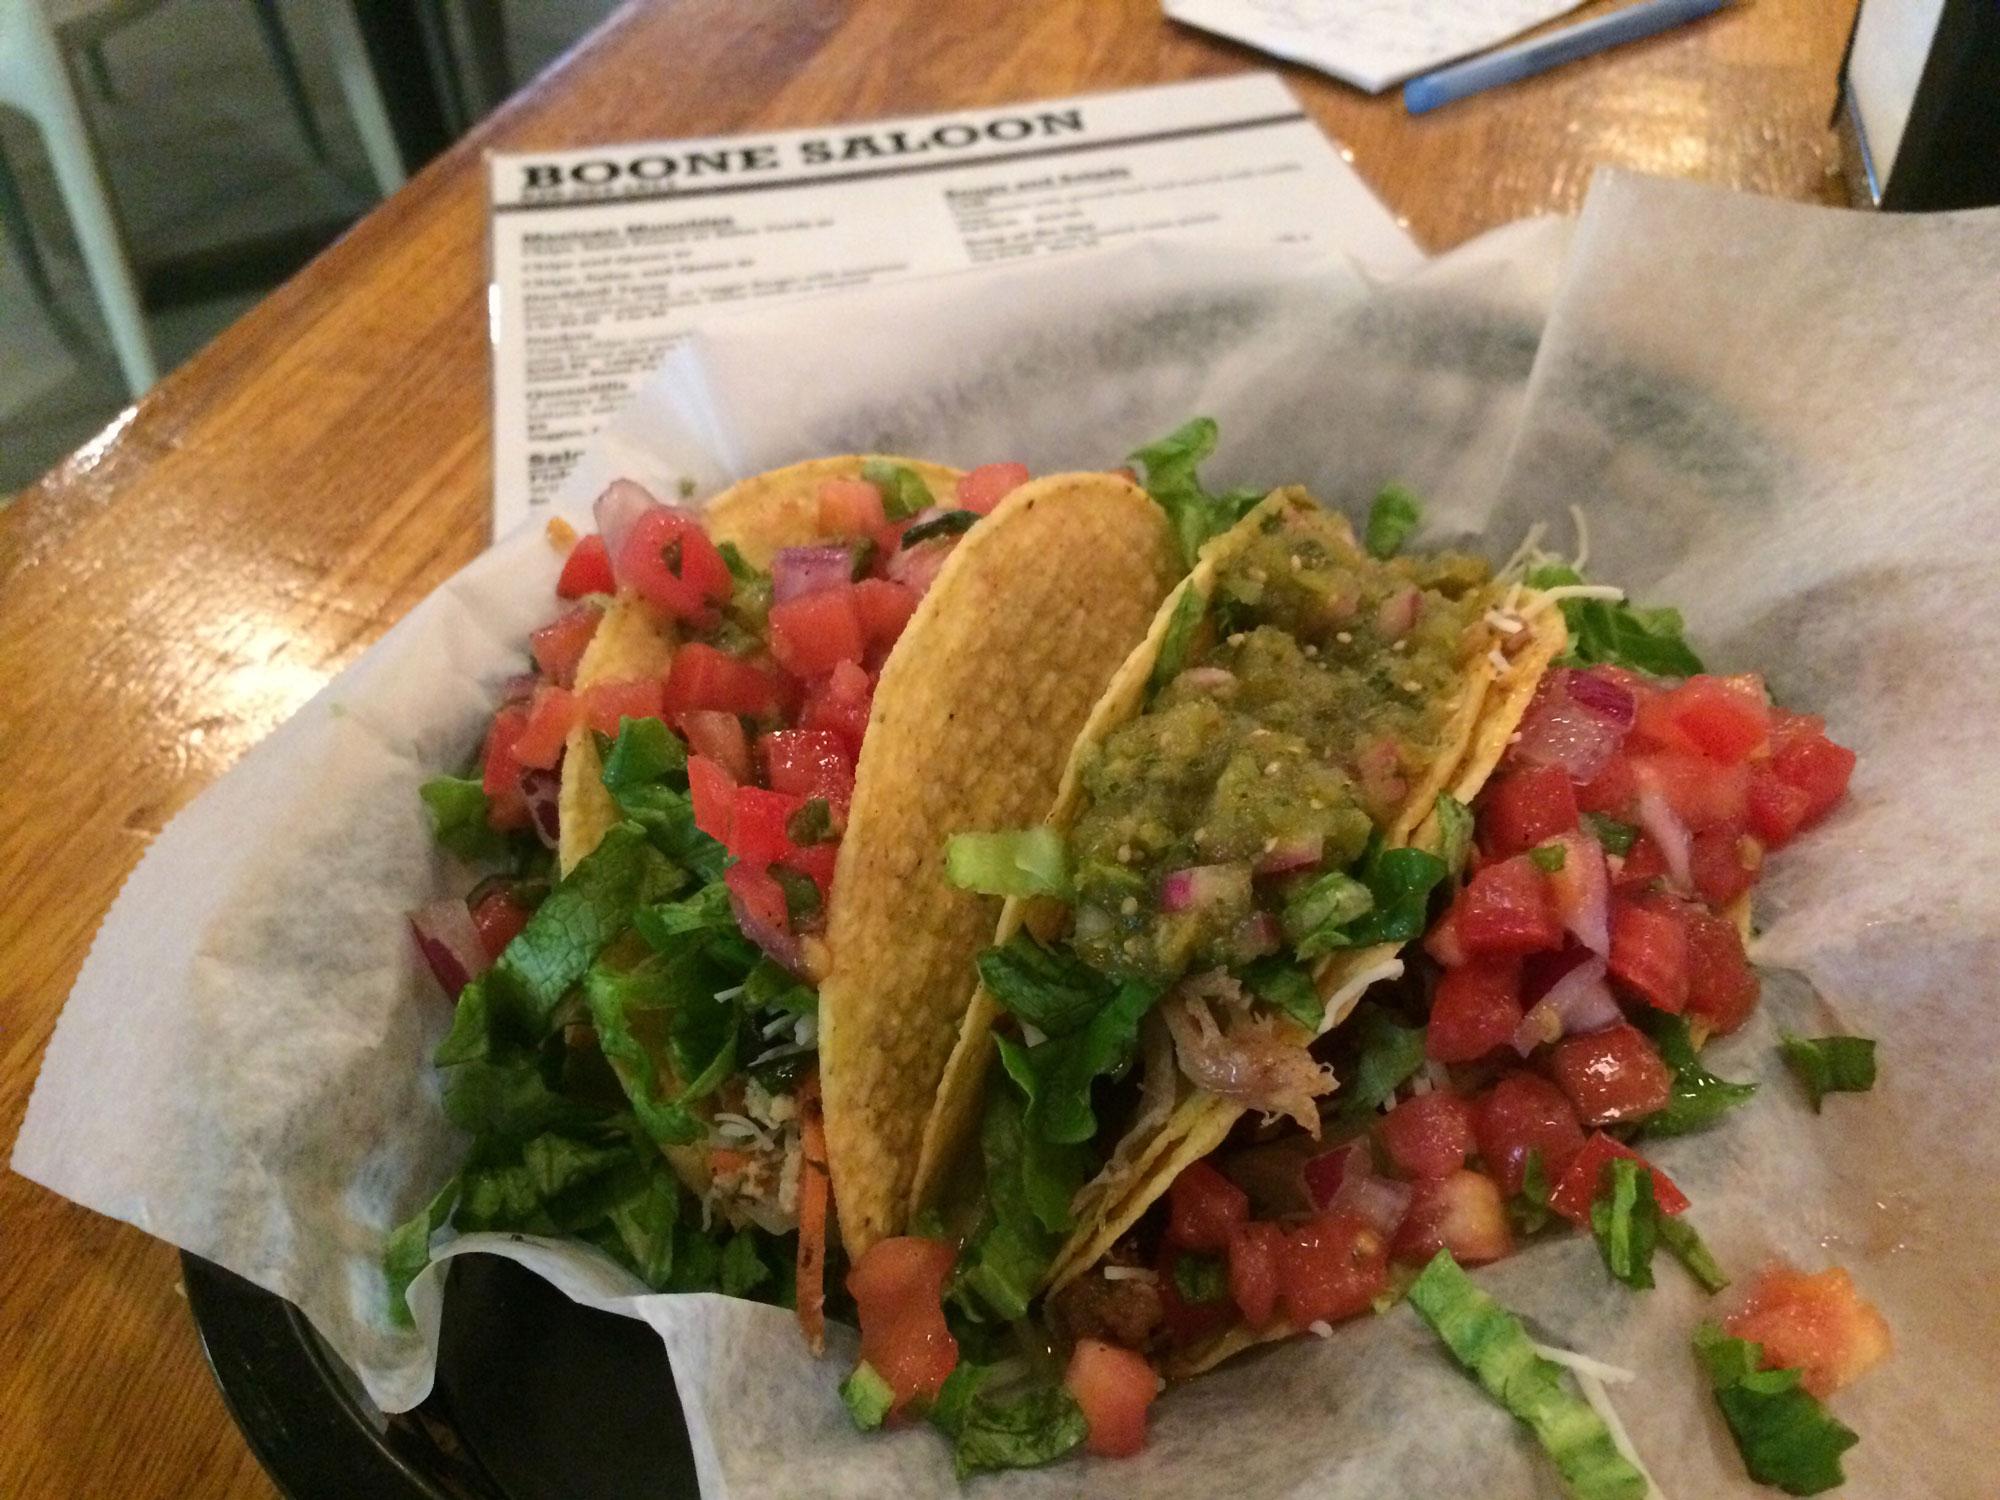 Boone Saloon offers four different taco types including veggie burger, chicken, pork and beef. Their Taco Tuesday special includes a $1.50 taco and $1.50 Pabst Blue Ribbon accompaniment. 